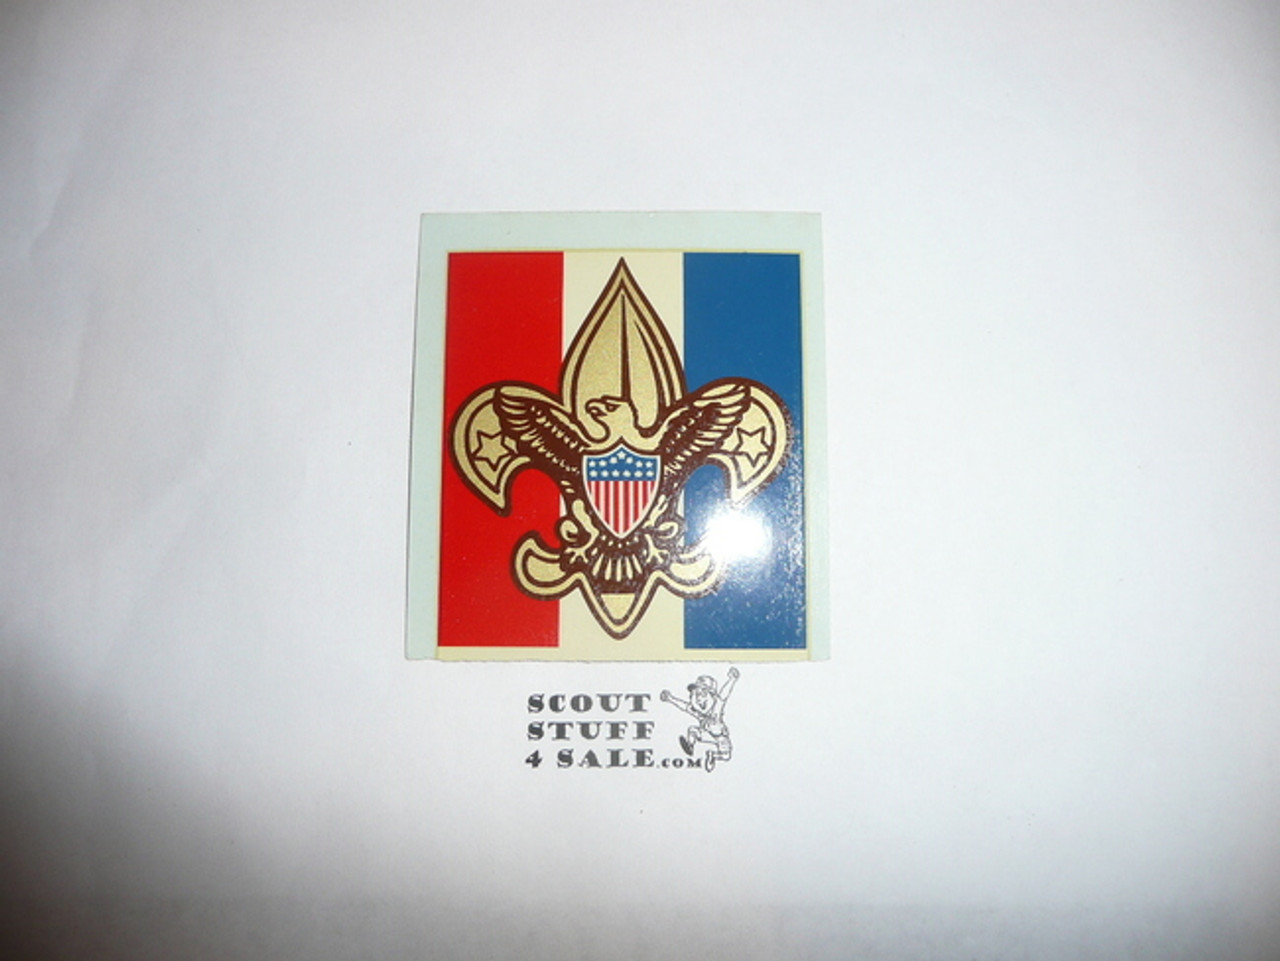 1970's Boy Scout Emblem Decal, red/white/blue small tenderfoot emblem